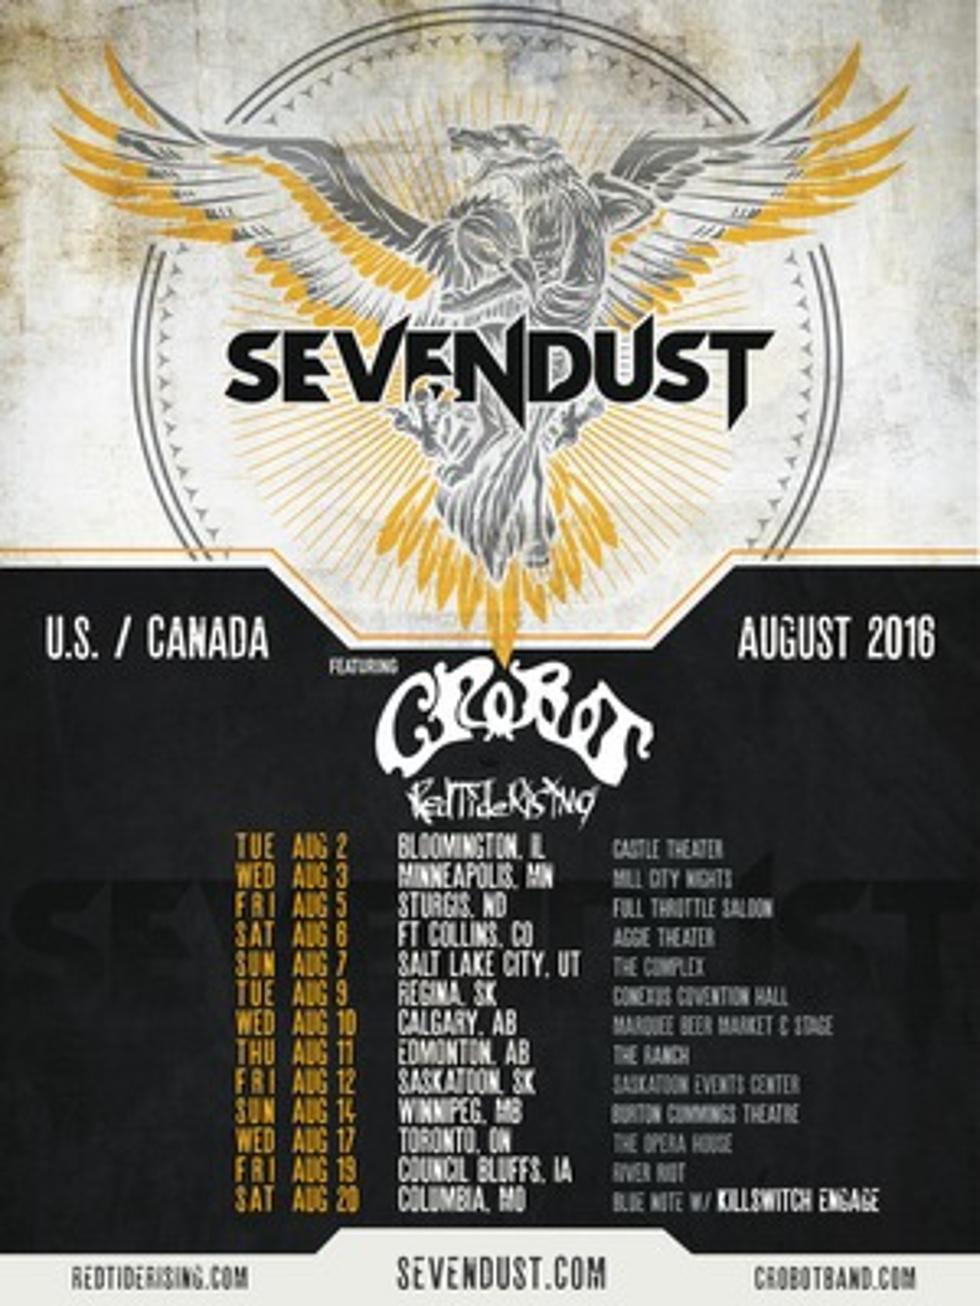 Sevendust Plan August 2016 North American Tour with Crobot + Red Tide Rising